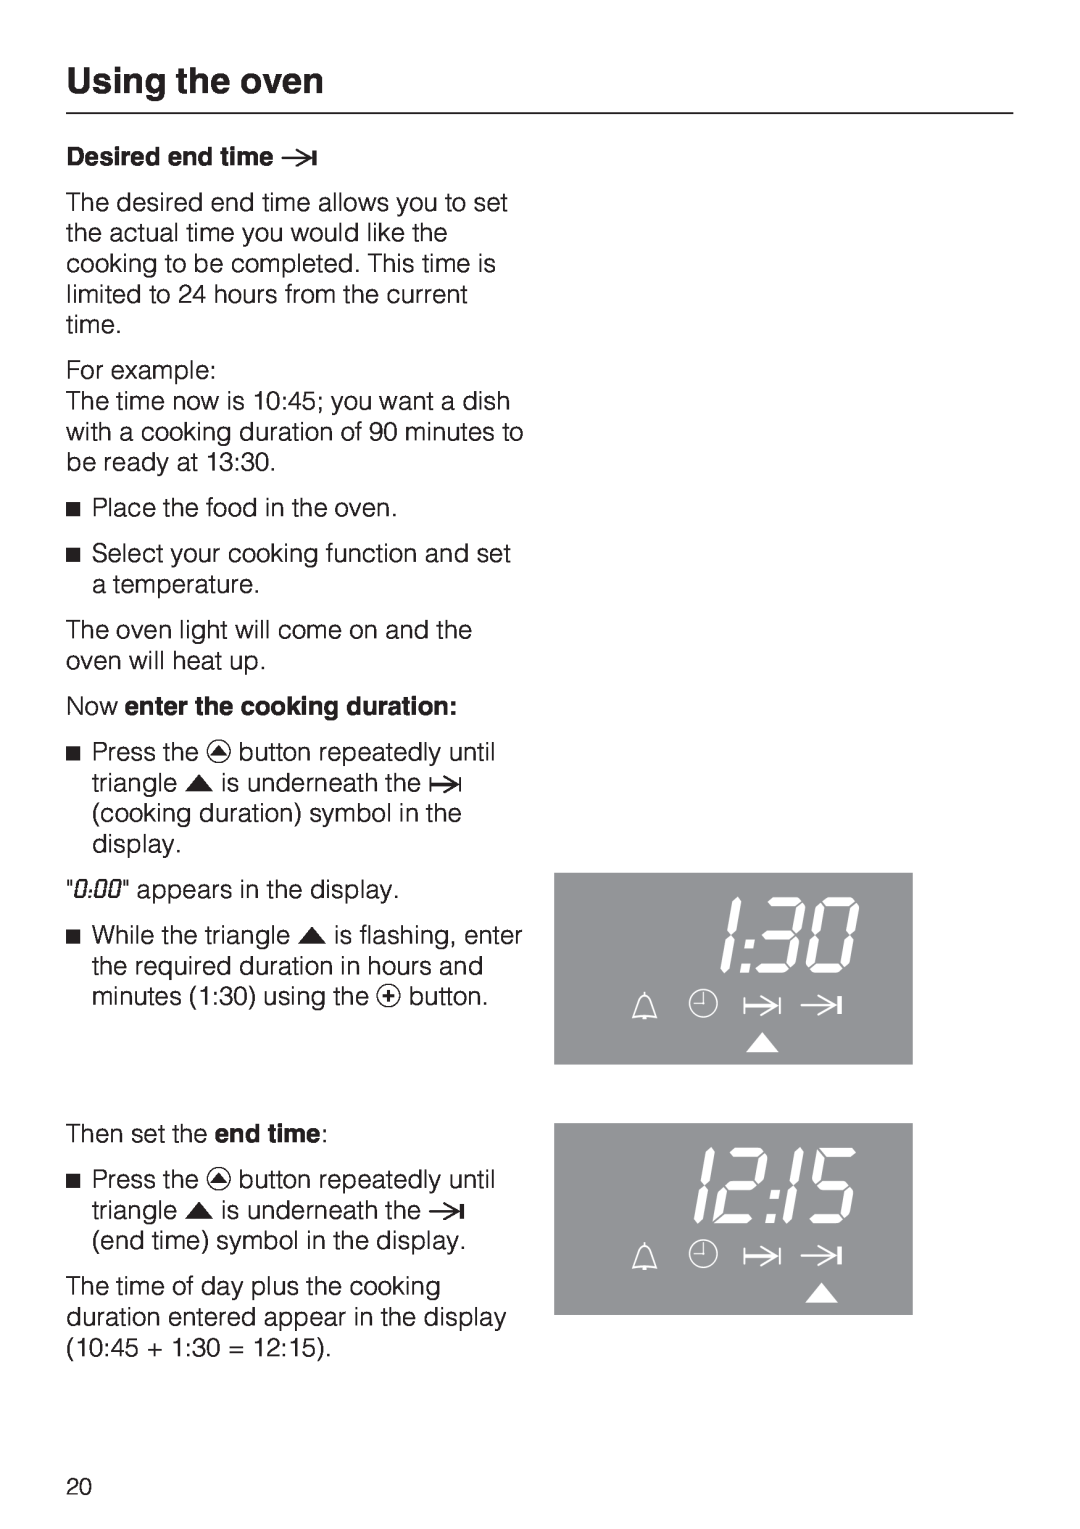 Miele H 4242 B installation instructions I2, Using the oven, Desired end time, Now enter the cooking duration 